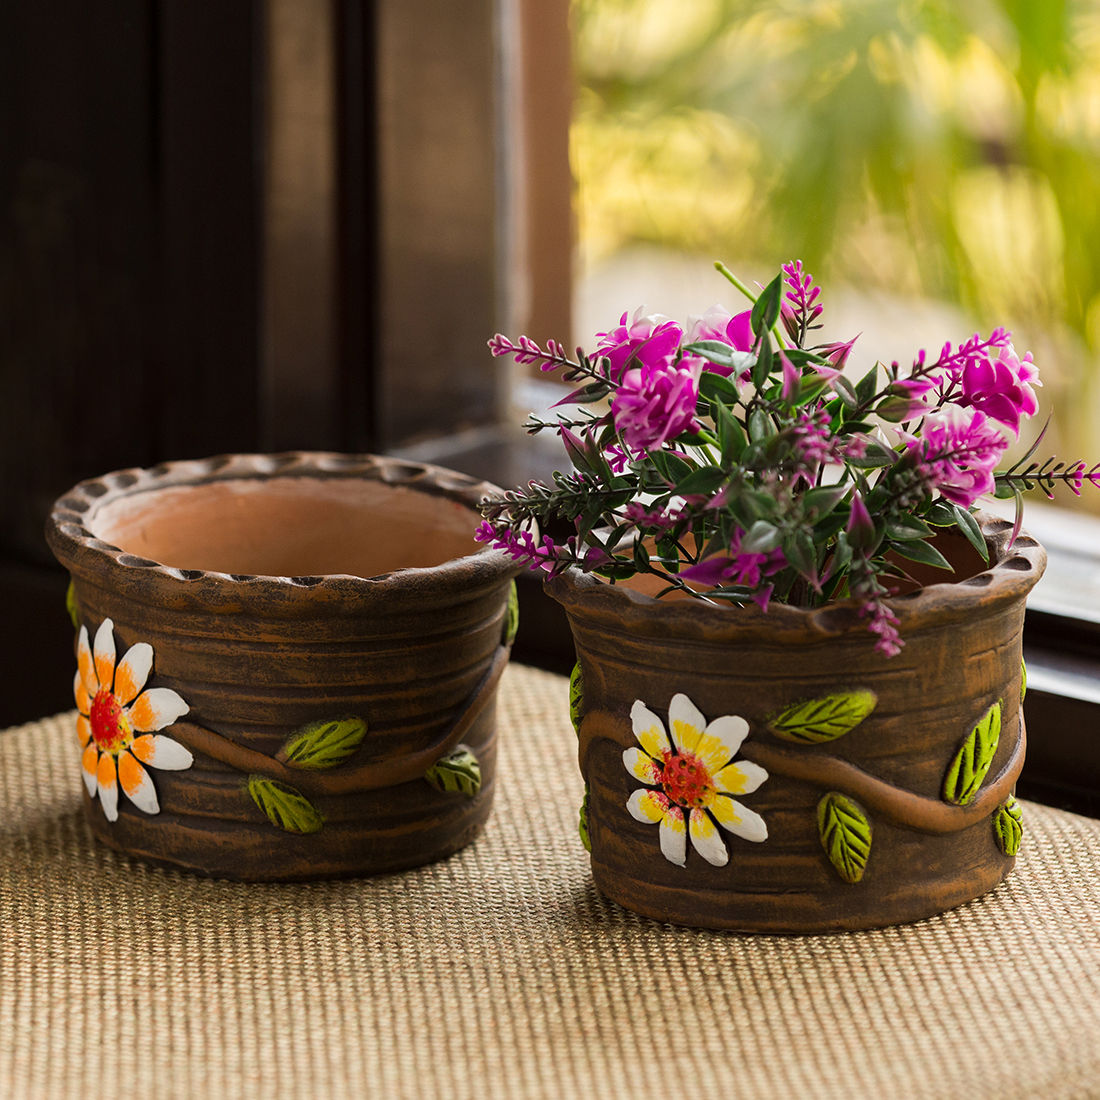 ExclusiveLane 'Mud Blossom Pair' Handmade & Hand-Painted Planter Pots In Terracotta ( Set Of 2)